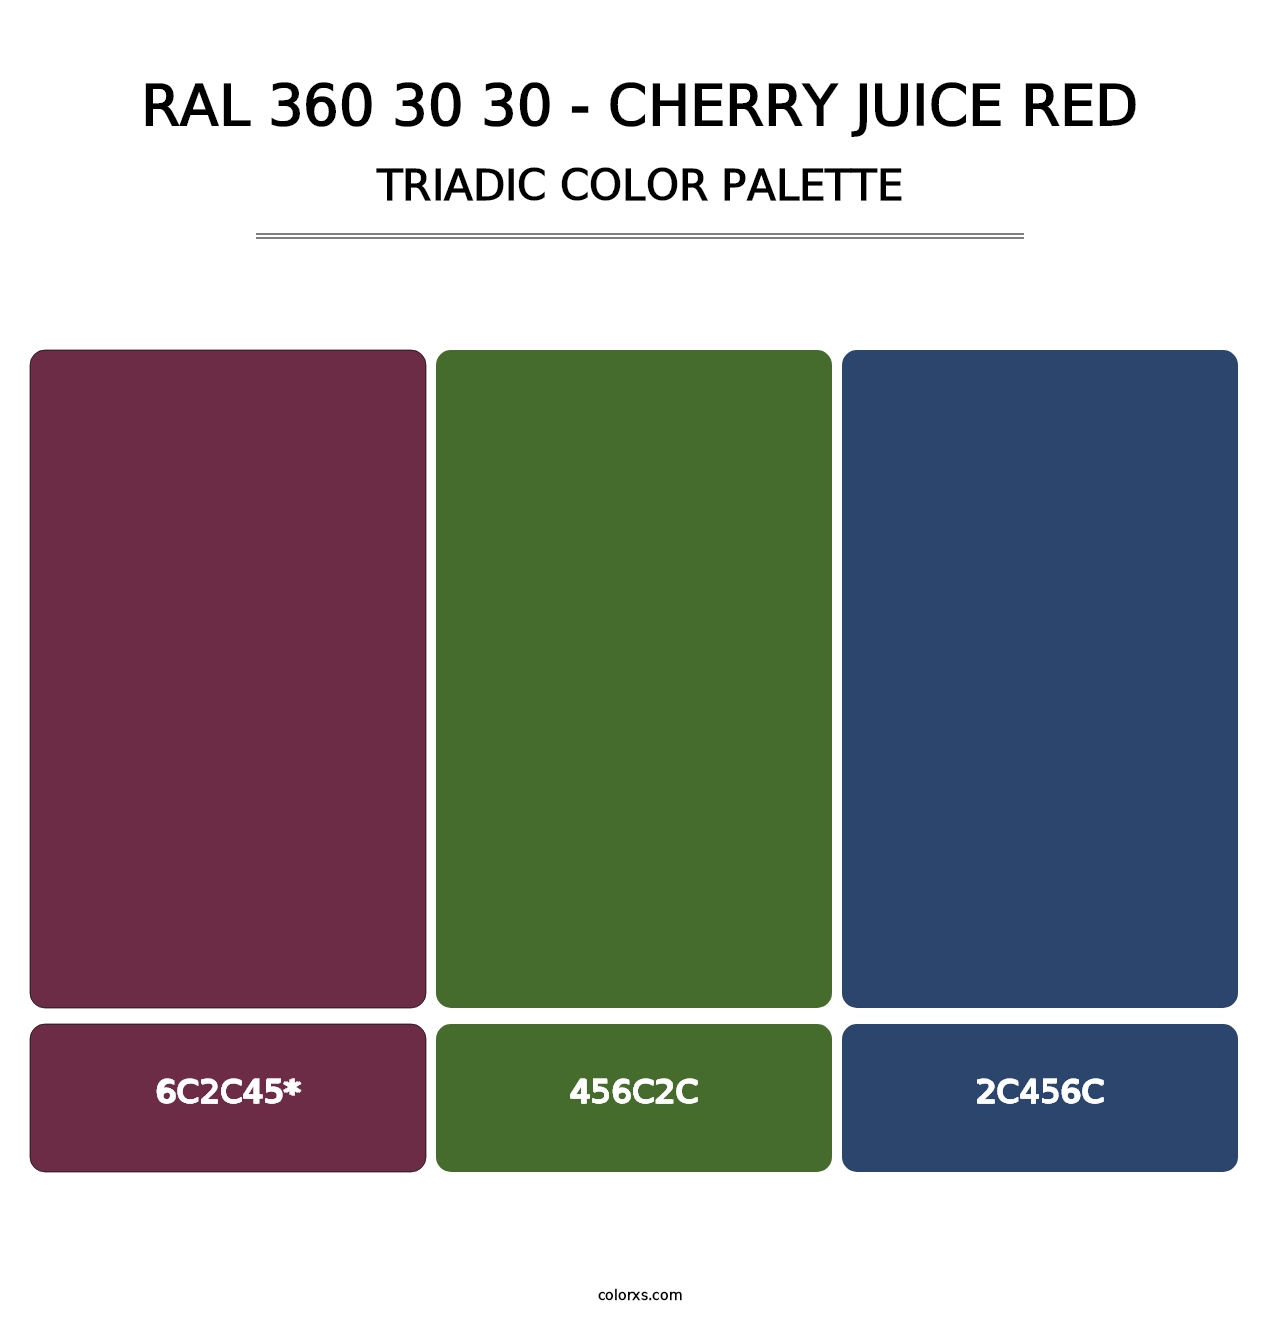 RAL 360 30 30 - Cherry Juice Red - Triadic Color Palette